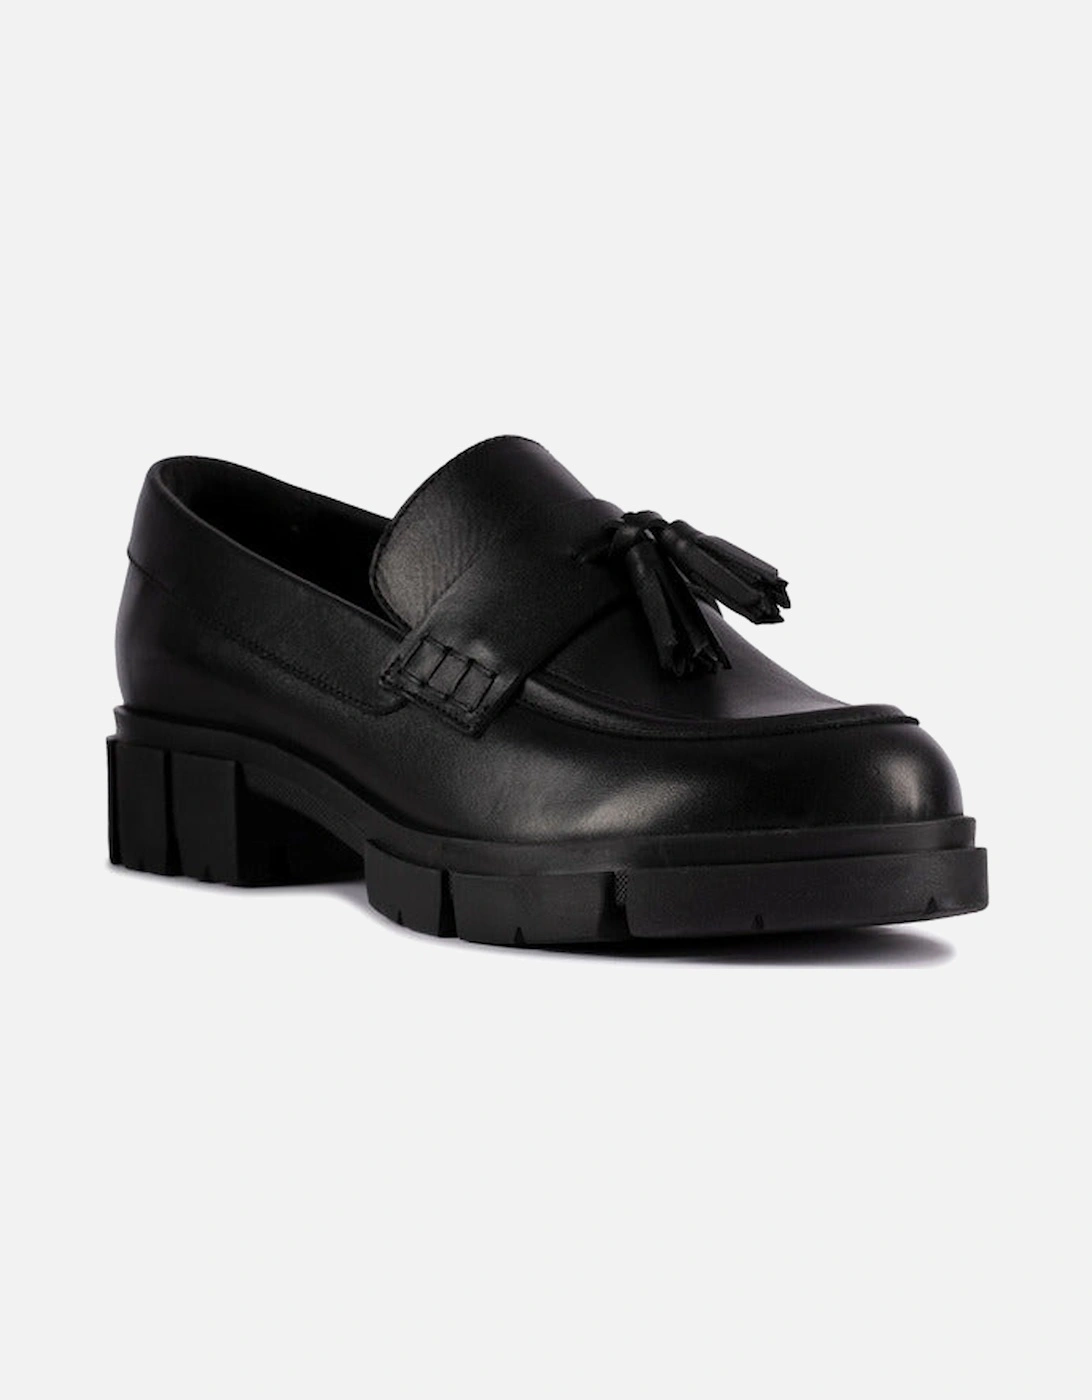 Teala Loafer in Black leather, 2 of 1